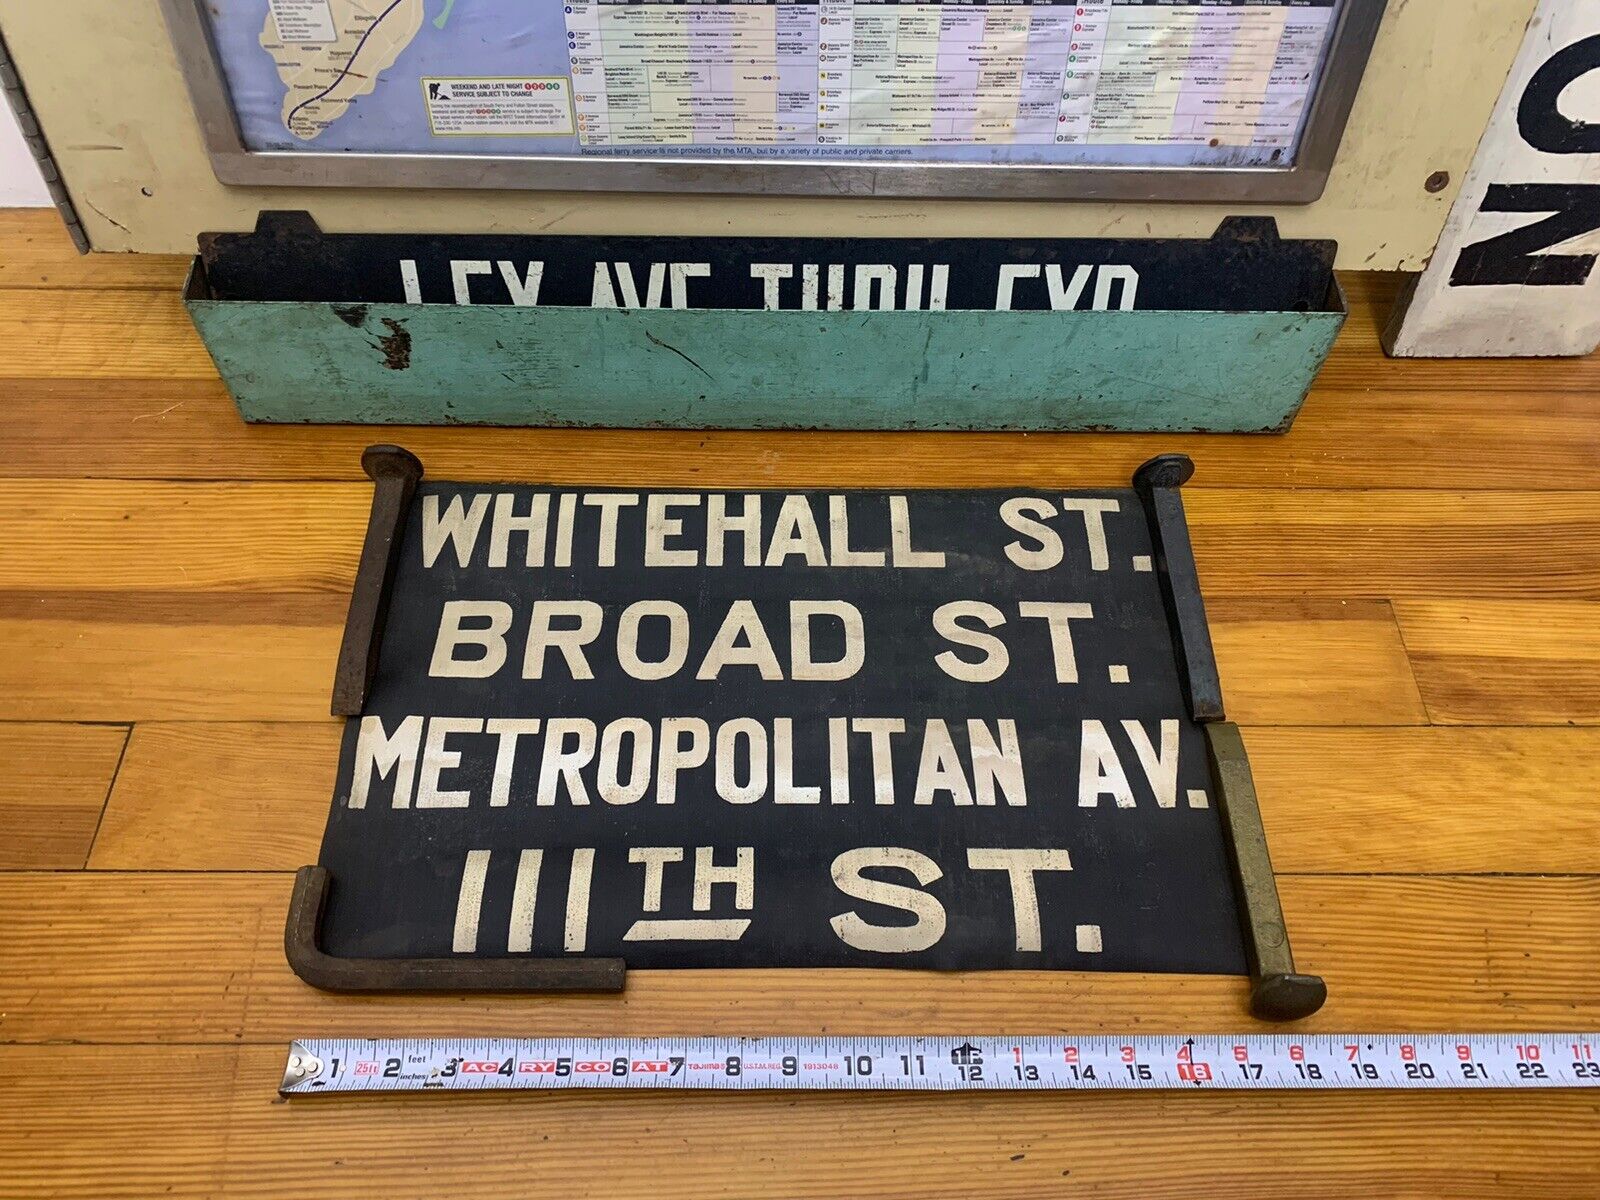 NY NYC SUBWAY ROLL SIGN BMT SMALL BROAD STREET FINANCIAL DISTRICT 111 WHITEHALL